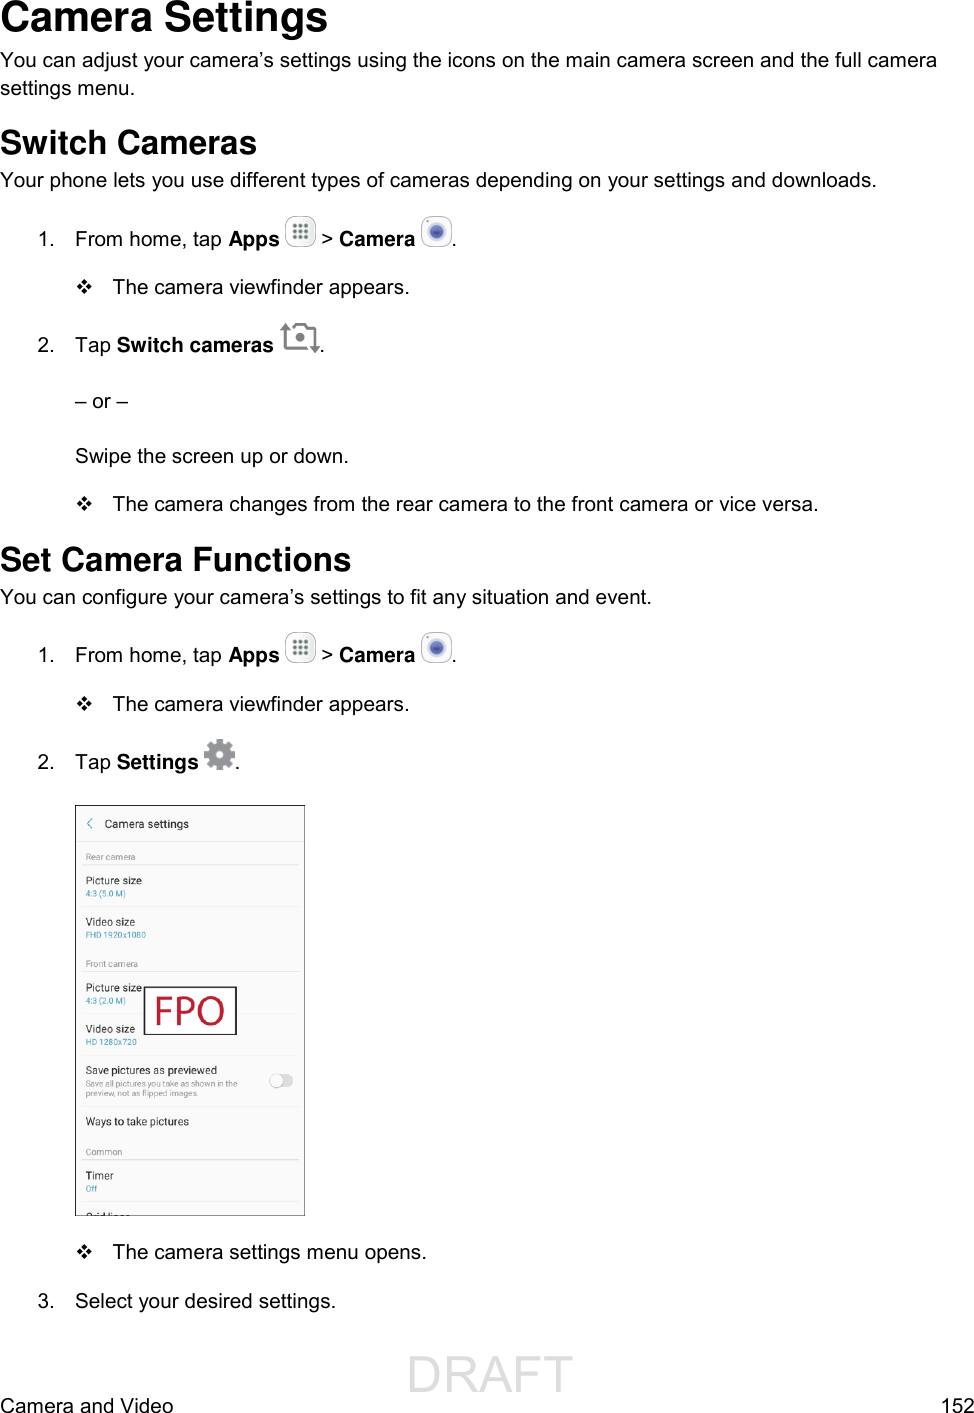                  DRAFT FOR INTERNAL USE ONLYCamera and Video  152 Camera Settings You can adjust your camera’s settings using the icons on the main camera screen and the full camera settings menu. Switch Cameras Your phone lets you use different types of cameras depending on your settings and downloads. 1.  From home, tap Apps   &gt; Camera  .    The camera viewfinder appears. 2.  Tap Switch cameras  .  – or –  Swipe the screen up or down.   The camera changes from the rear camera to the front camera or vice versa. Set Camera Functions You can configure your camera’s settings to fit any situation and event. 1.  From home, tap Apps   &gt; Camera  .   The camera viewfinder appears. 2.  Tap Settings  .     The camera settings menu opens. 3.  Select your desired settings. 